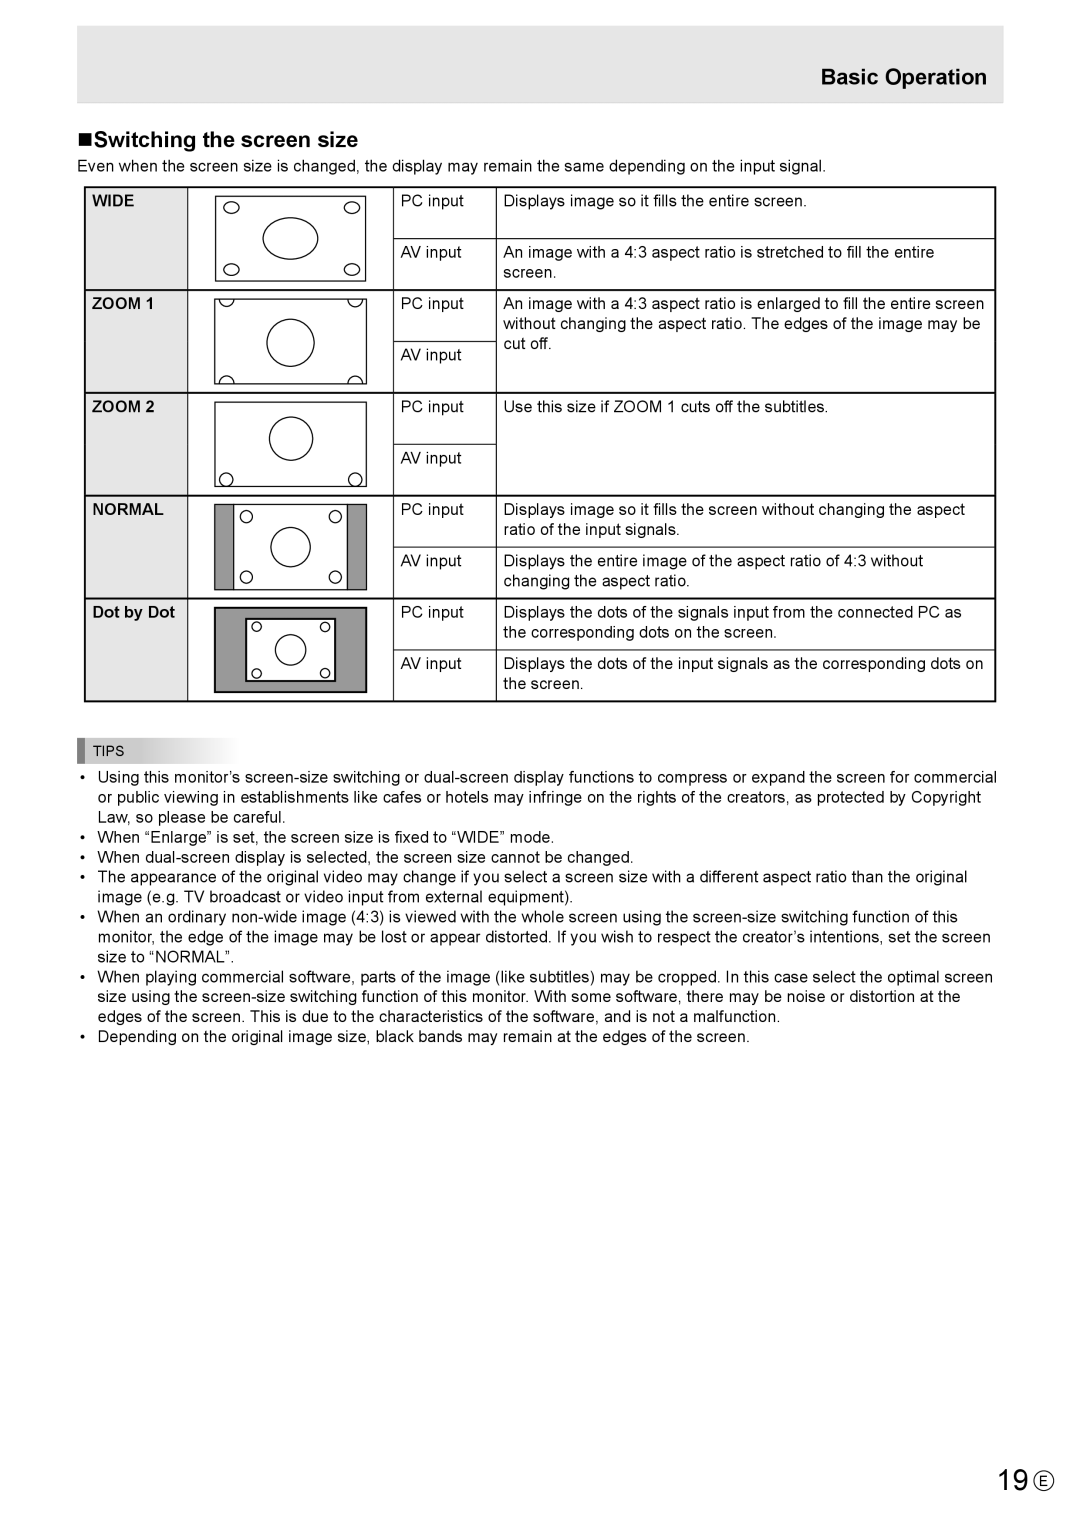 Sharp PN-E602 operation manual 19 E, Basic Operation nSwitching the screen size, WIDE ZOOM ZOOM NORMAL Dot by Dot 